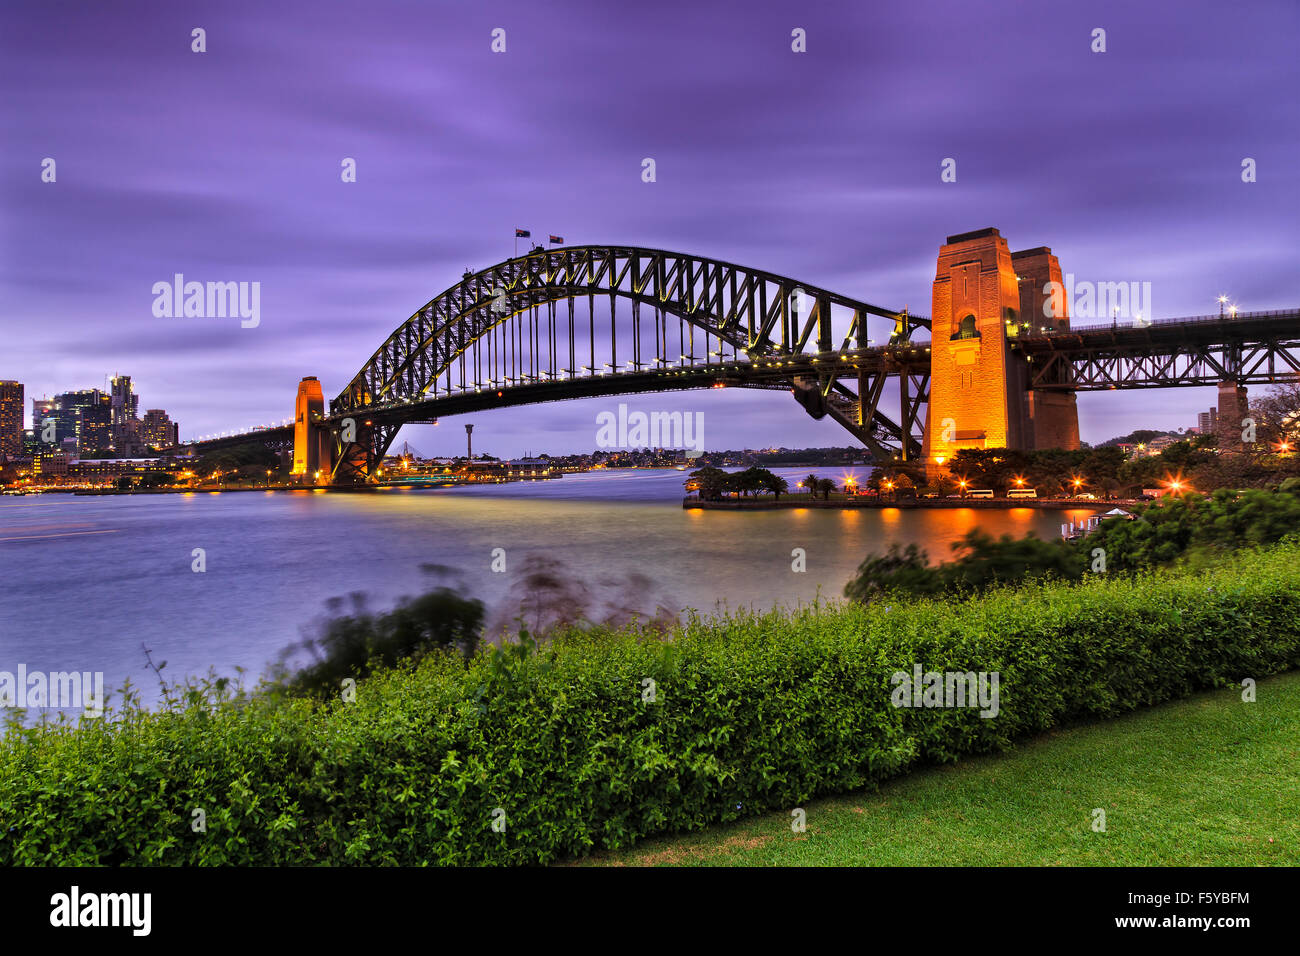 side view of famous Sydney Harbour bridge at sunset with illumination from green recreational park at milsons point with bushes Stock Photo